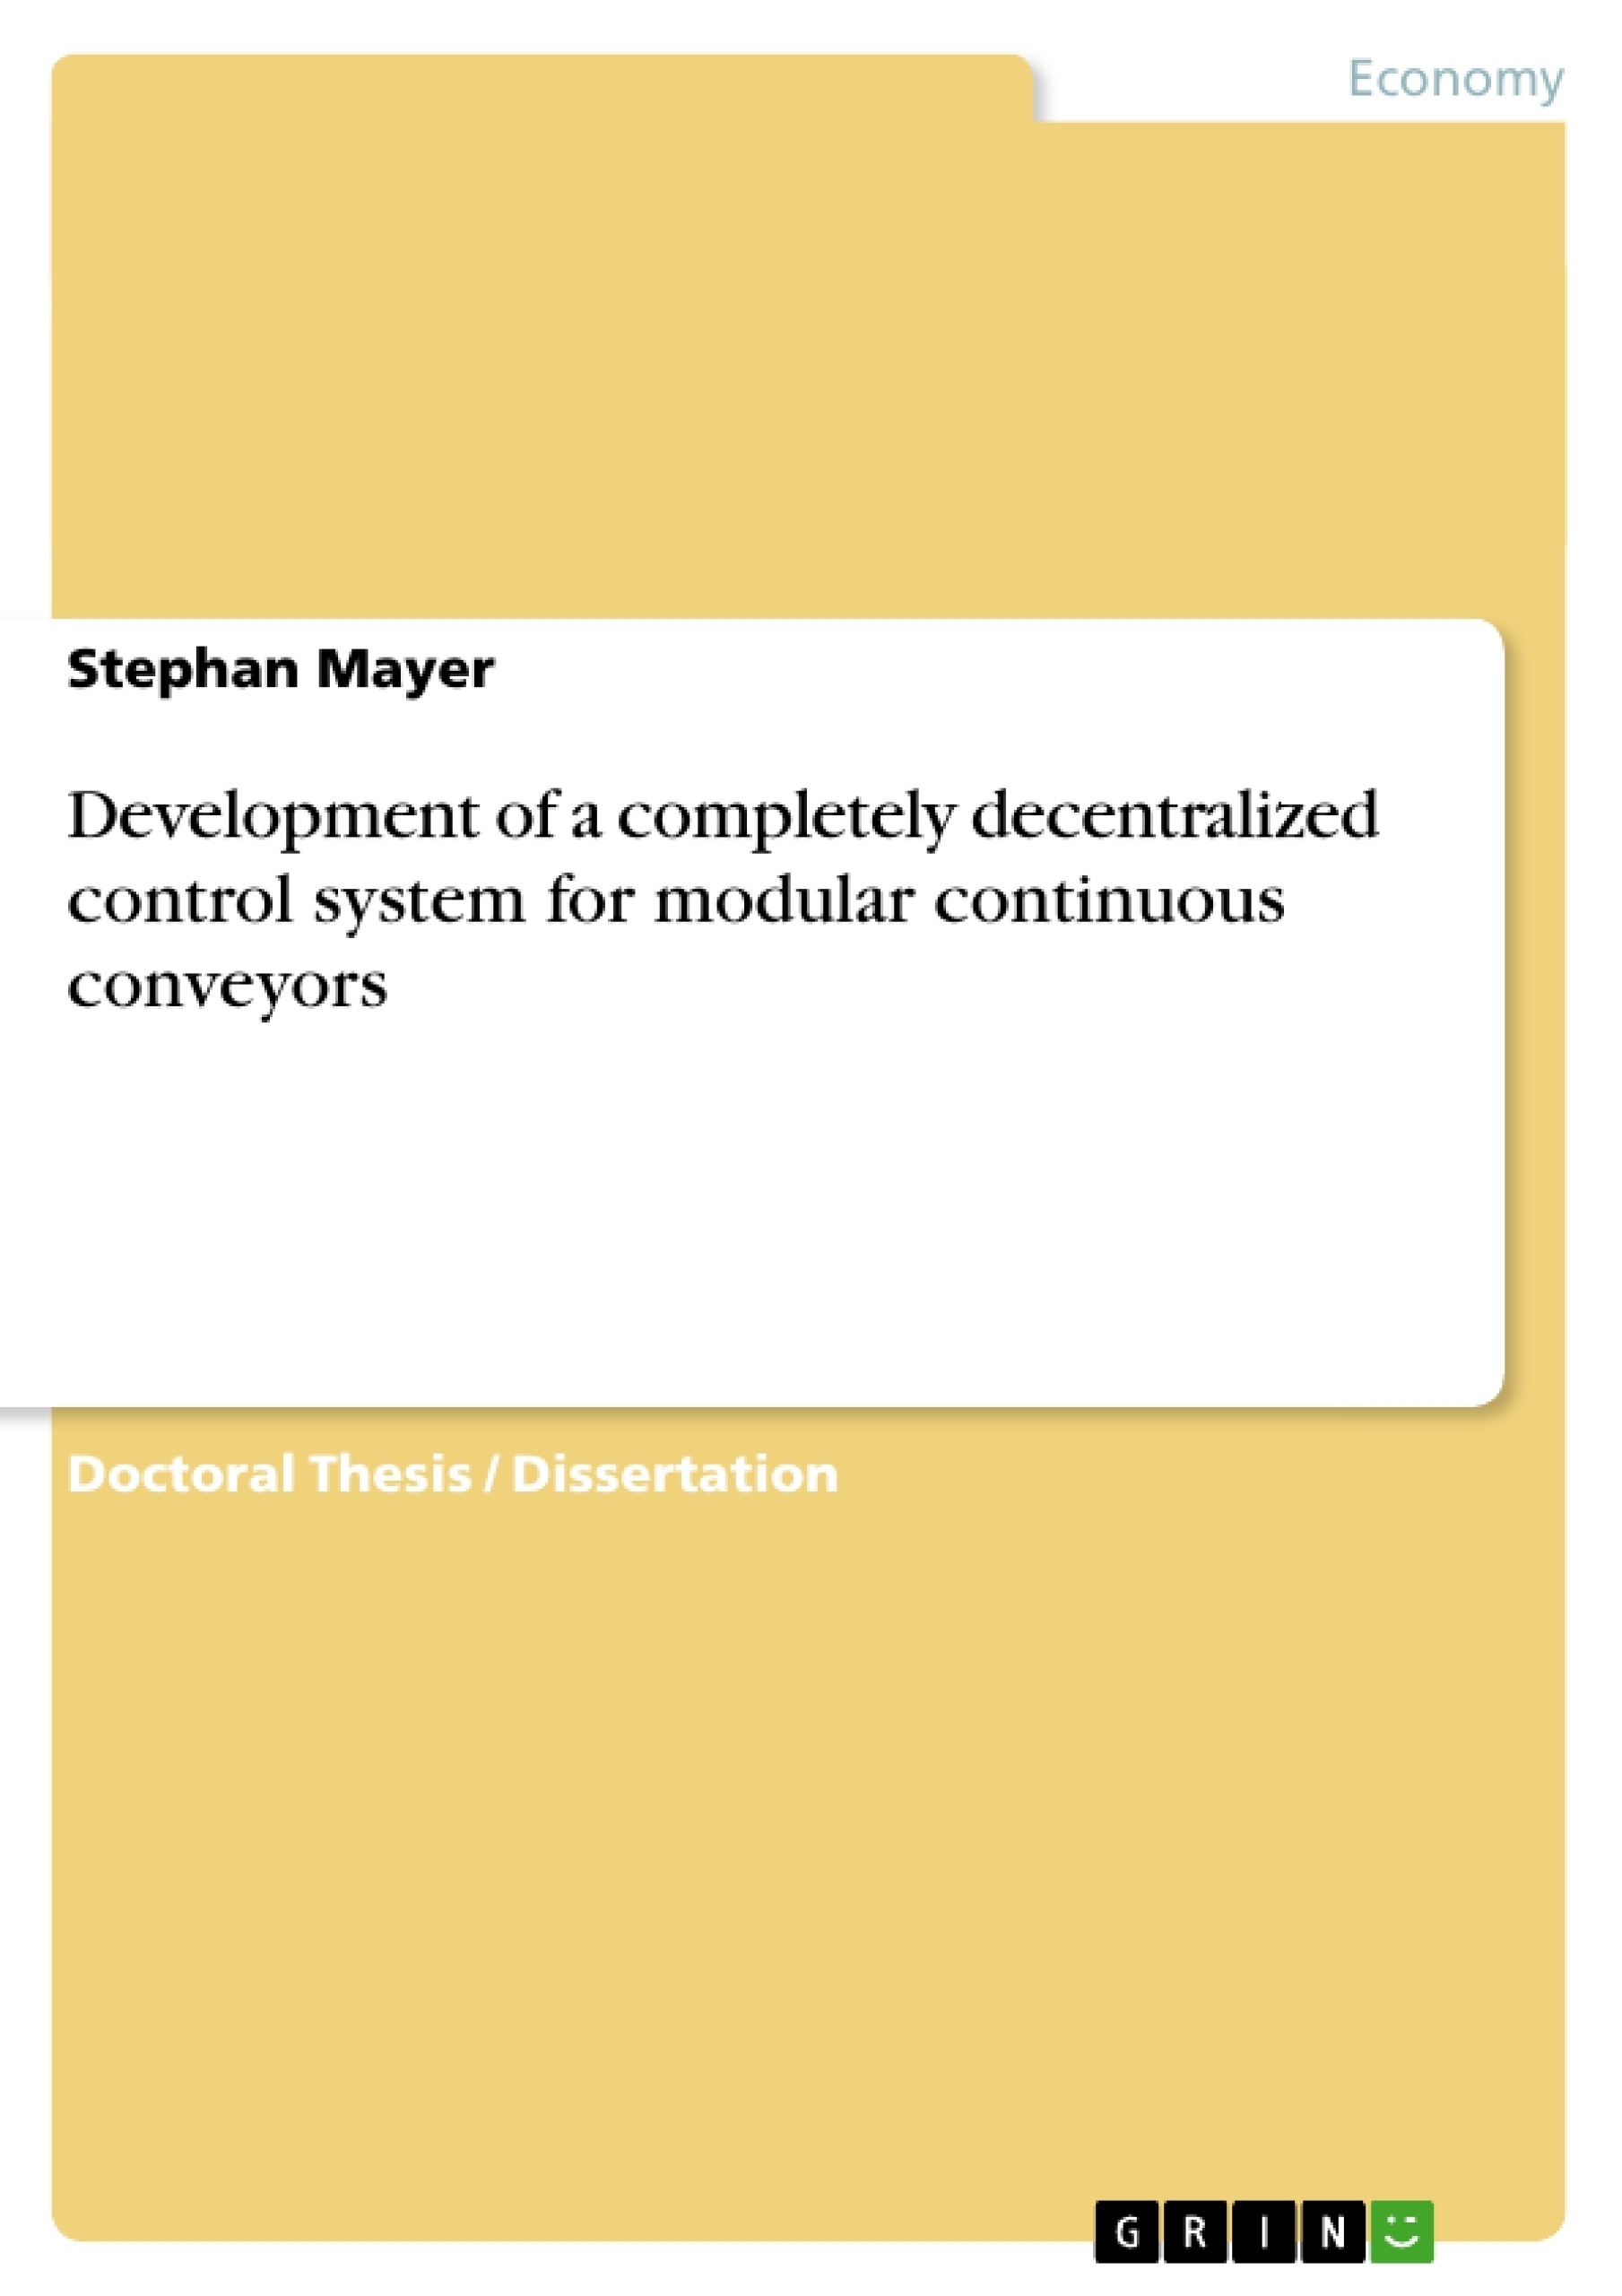 Título: Development of a completely decentralized control system for modular continuous conveyors